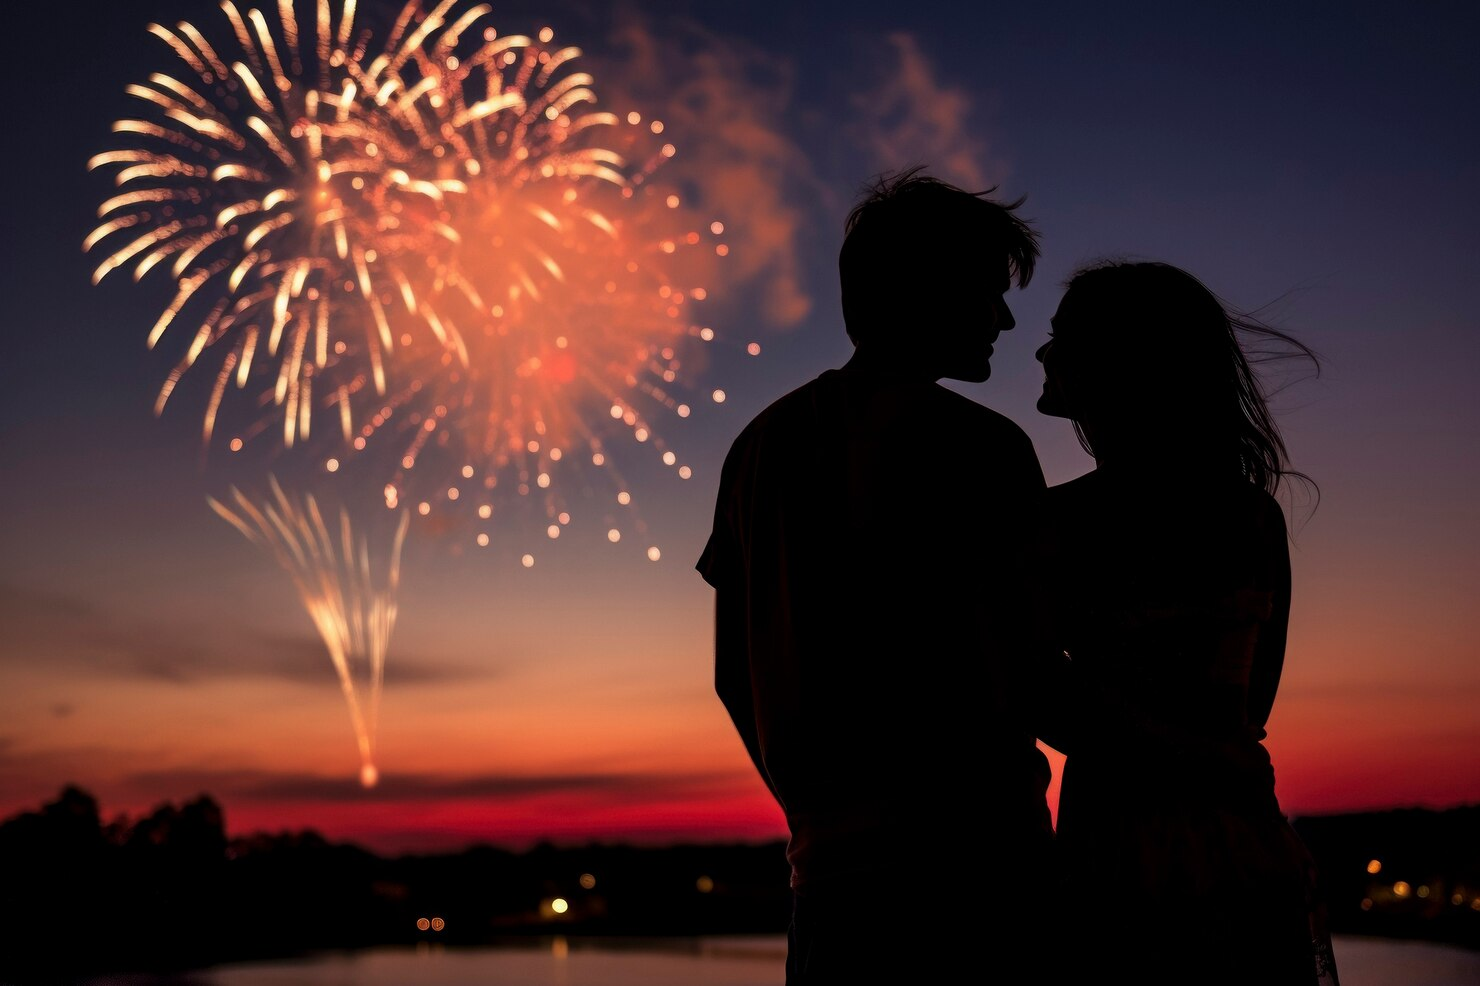 A couple sharing a moment under New Year's Eve fireworks.